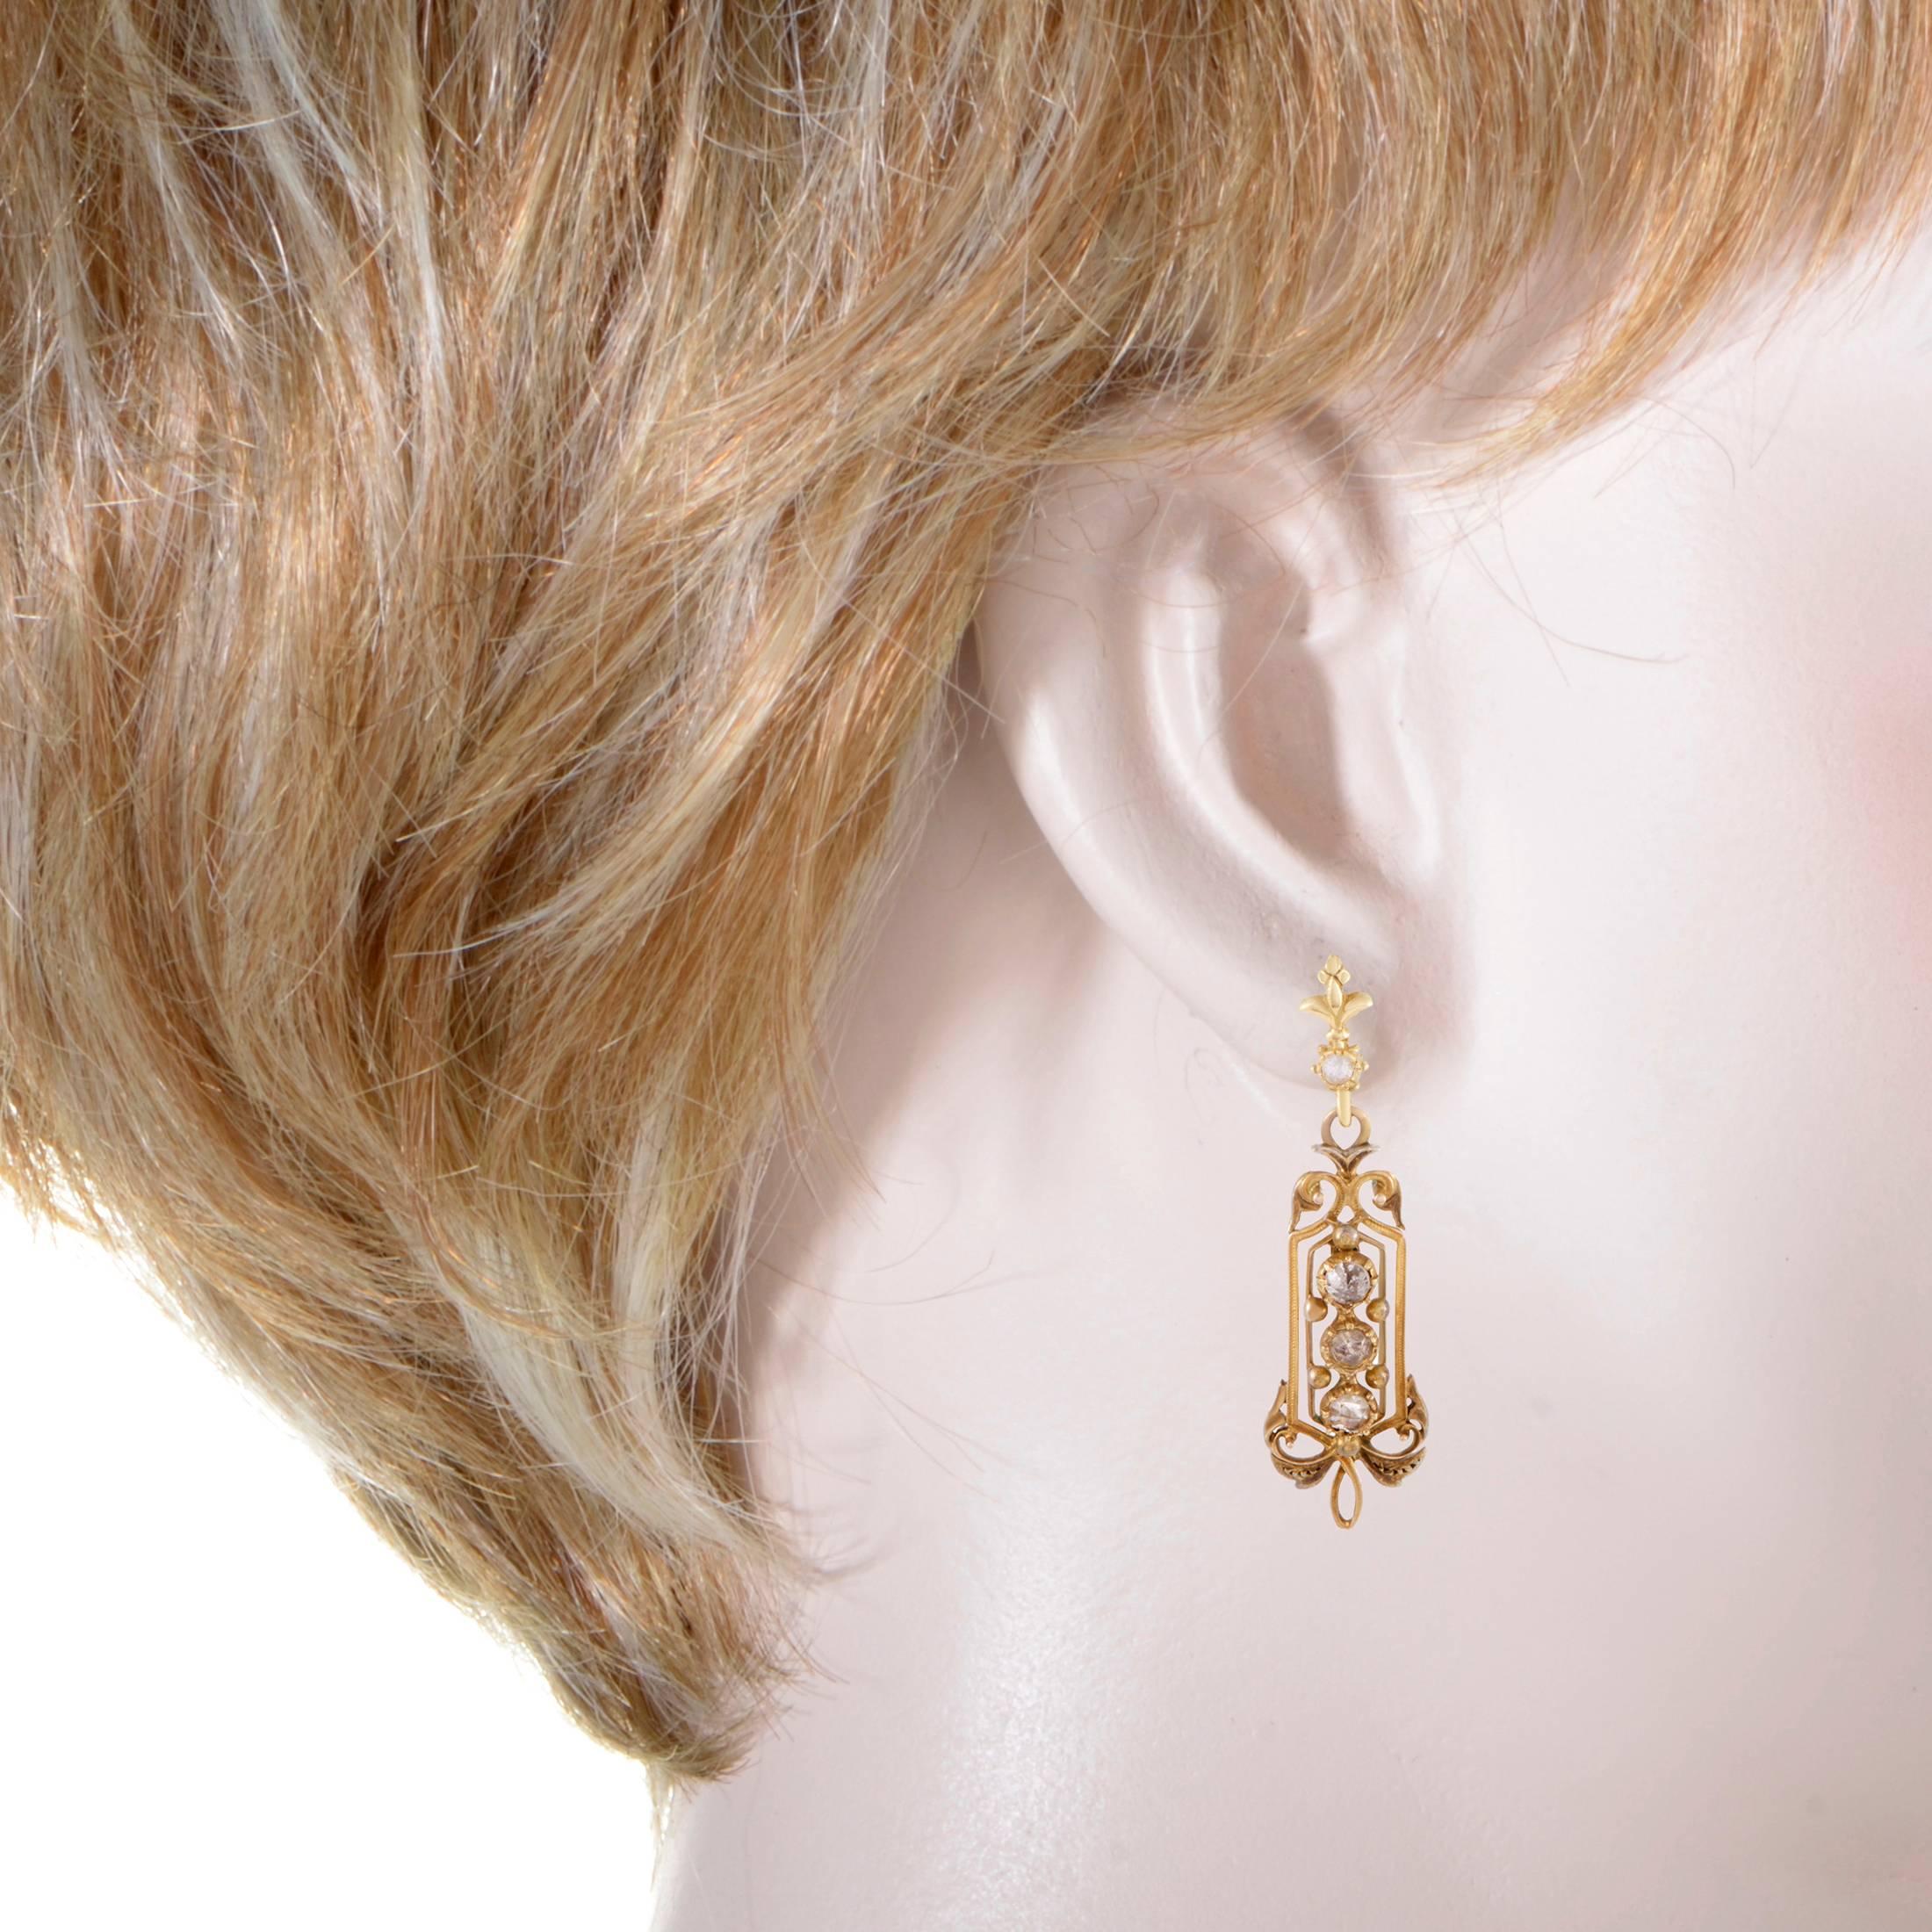 With a design reminiscent of the iconic Victorian era pieces, these extravagant earrings exude classy elegant appeal with a certain antique feel to them. The pair is made of sophisticated 18K yellow gold and decorated with splendid rose cut diamond